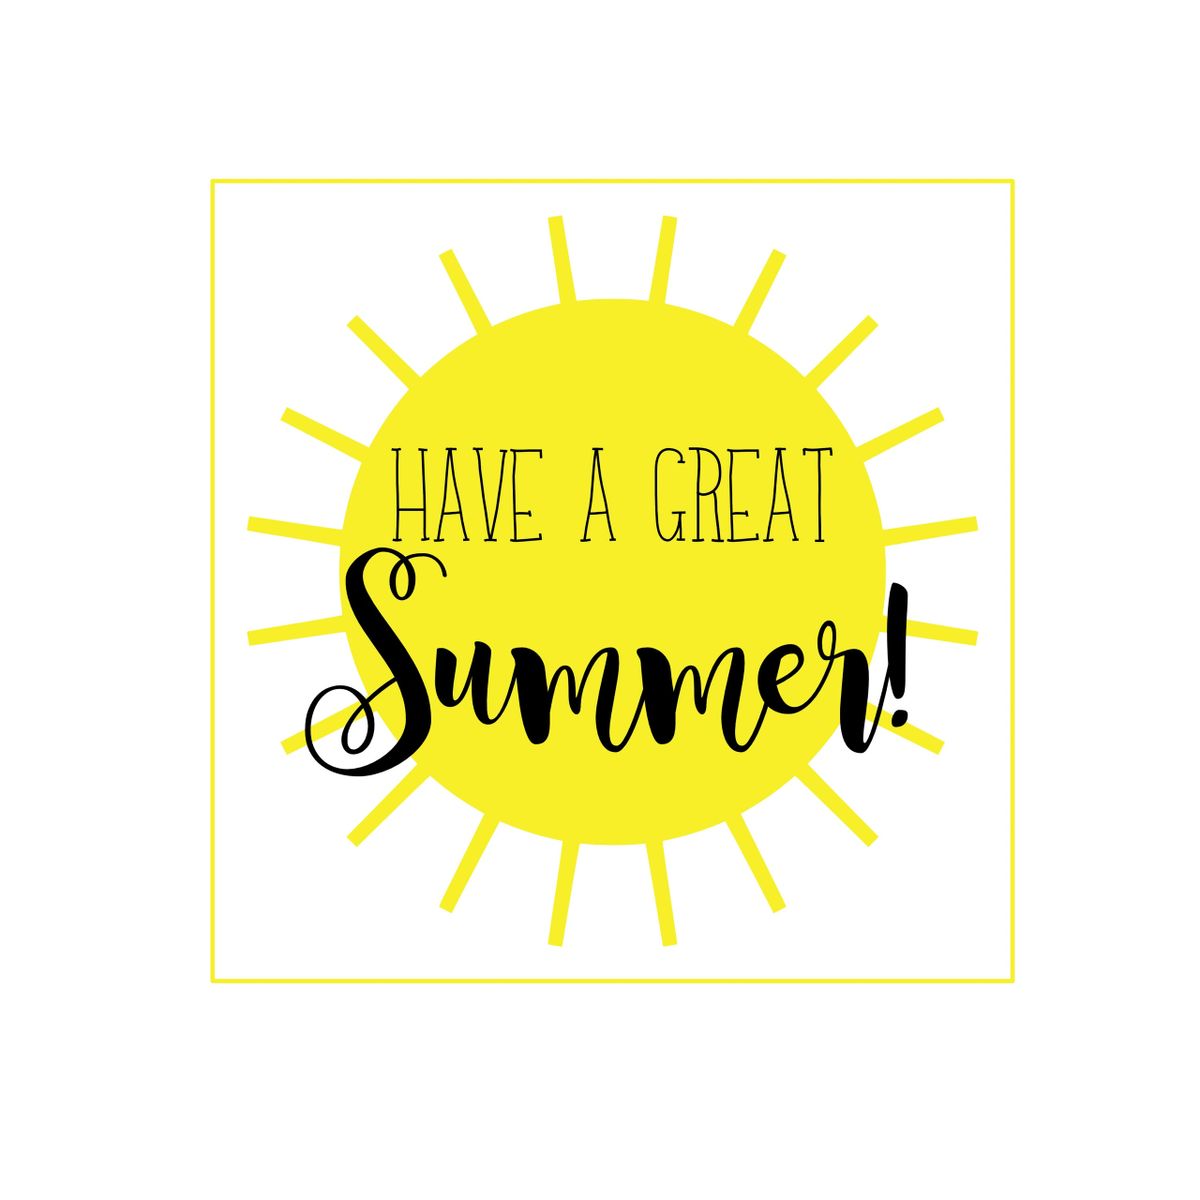 Have a great summer! Tag